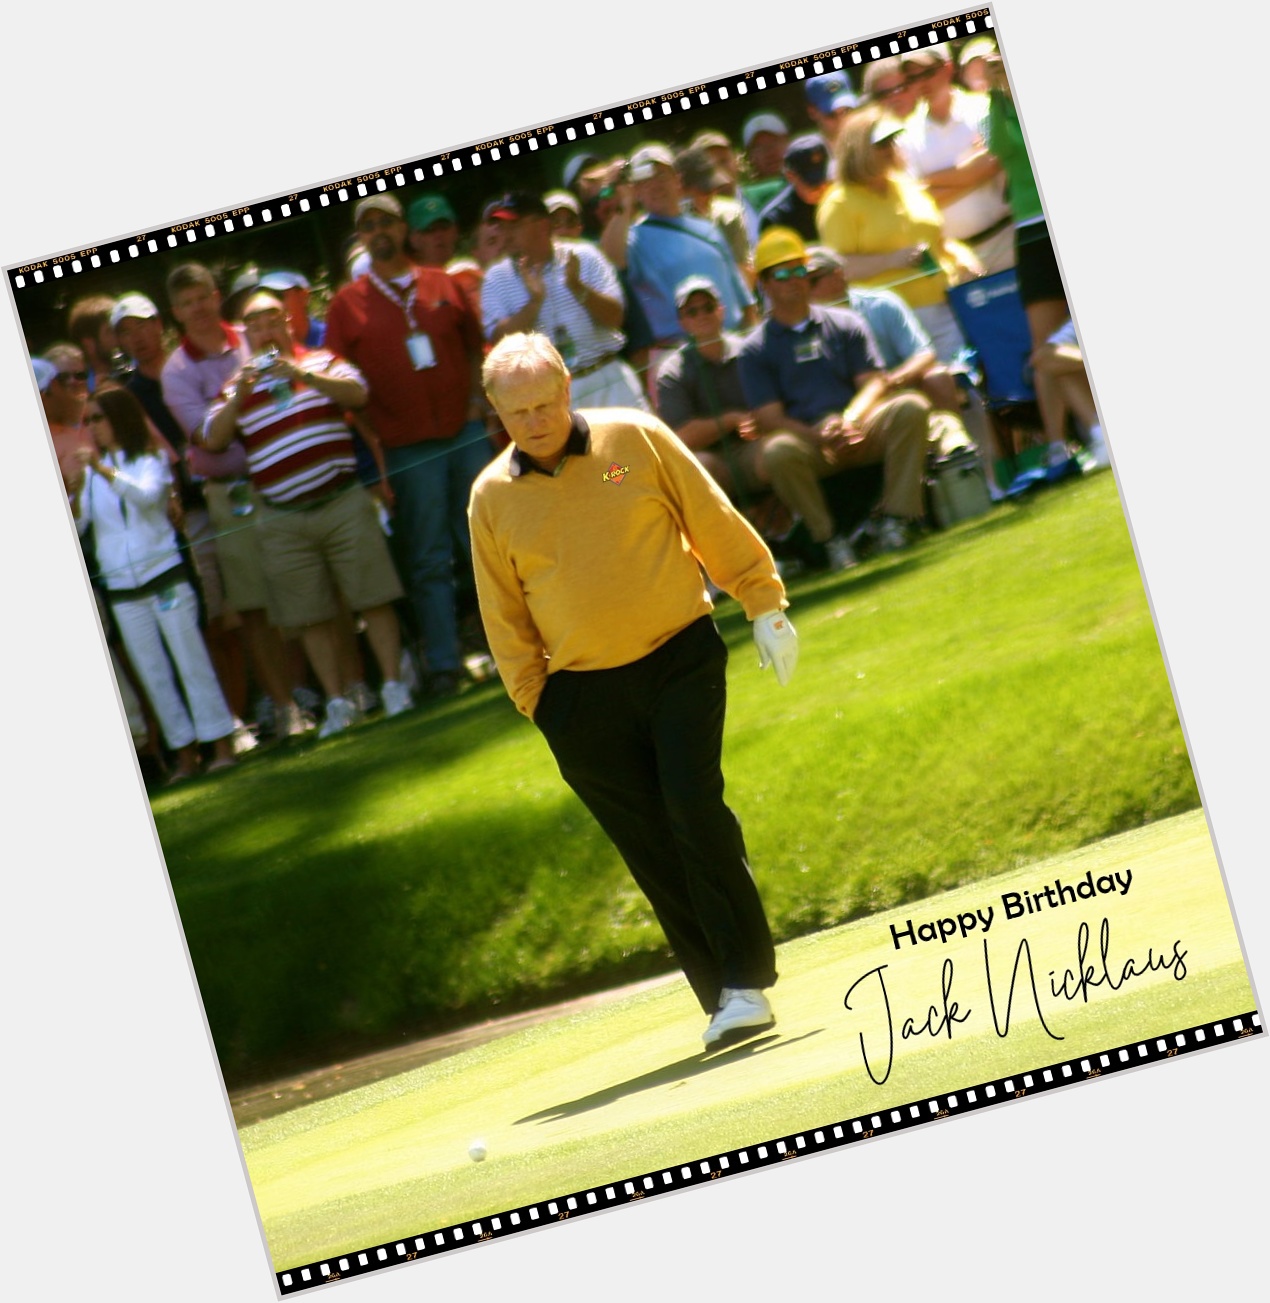 Happy Birthday Jack Nicklaus. The greatest golfer of all time?? What do you say? -   